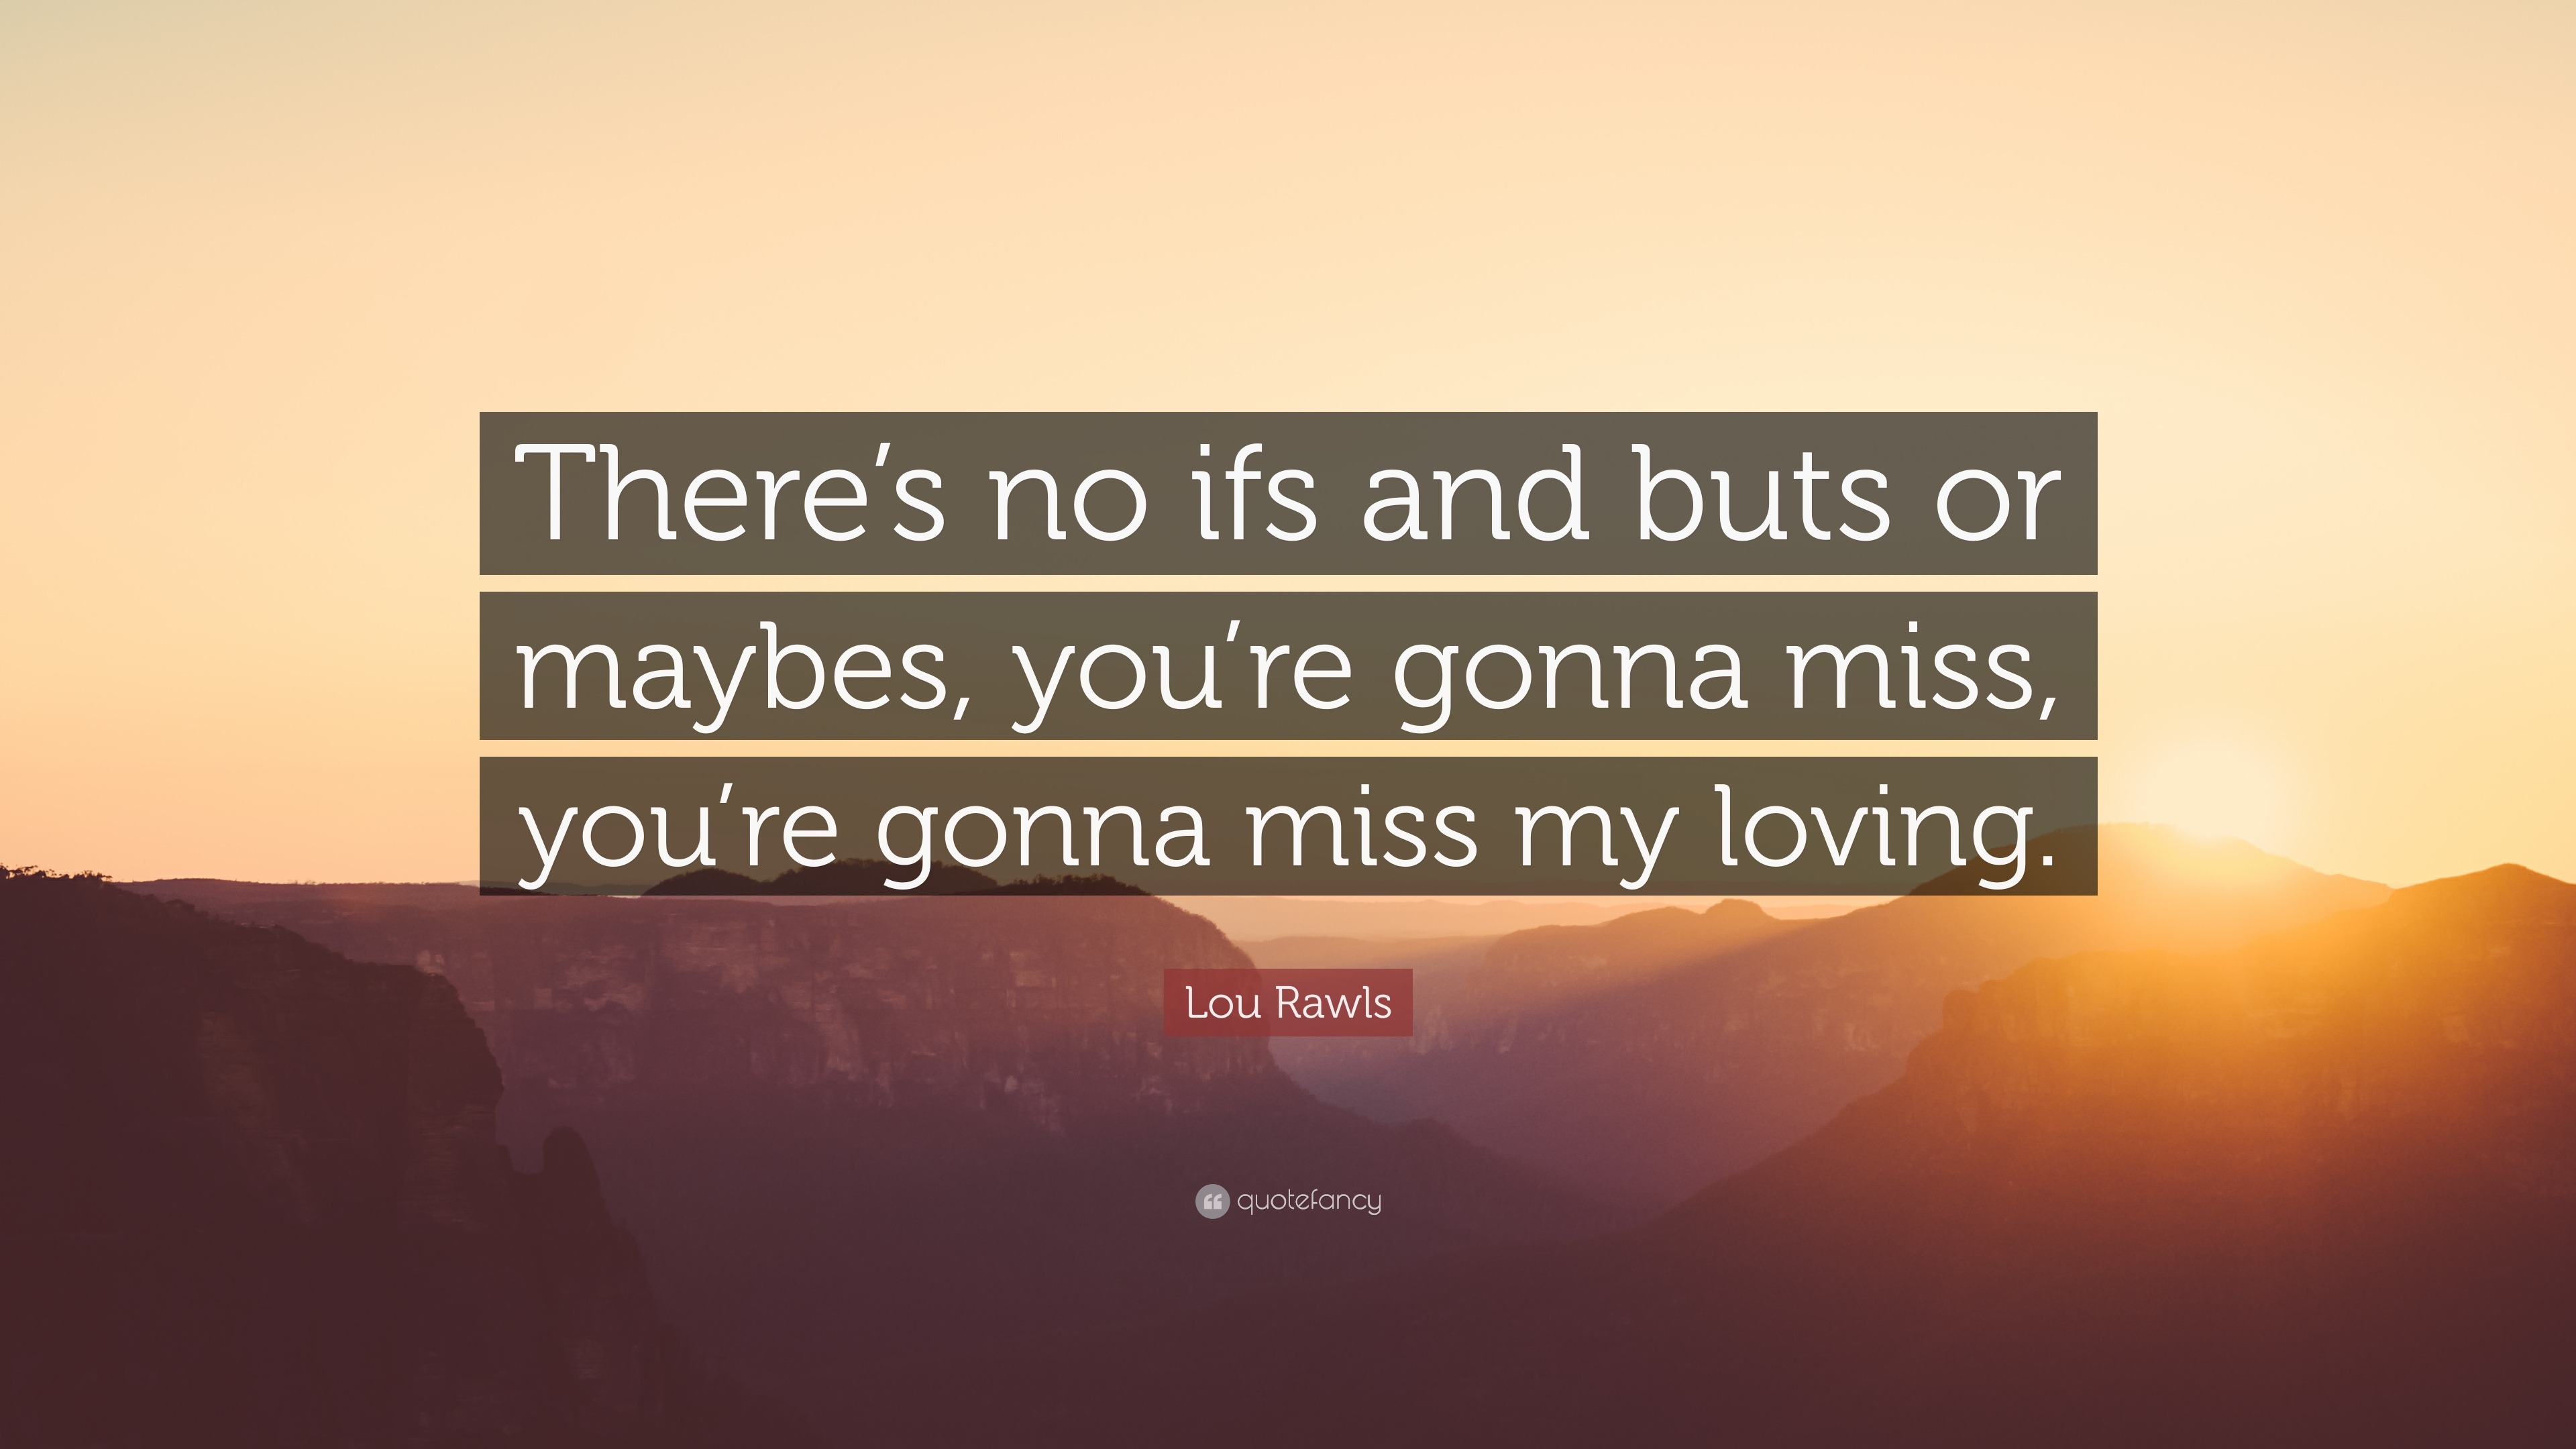 Lou Rawls Quote: “There’s no ifs and buts or maybes, you’re gonna miss ...